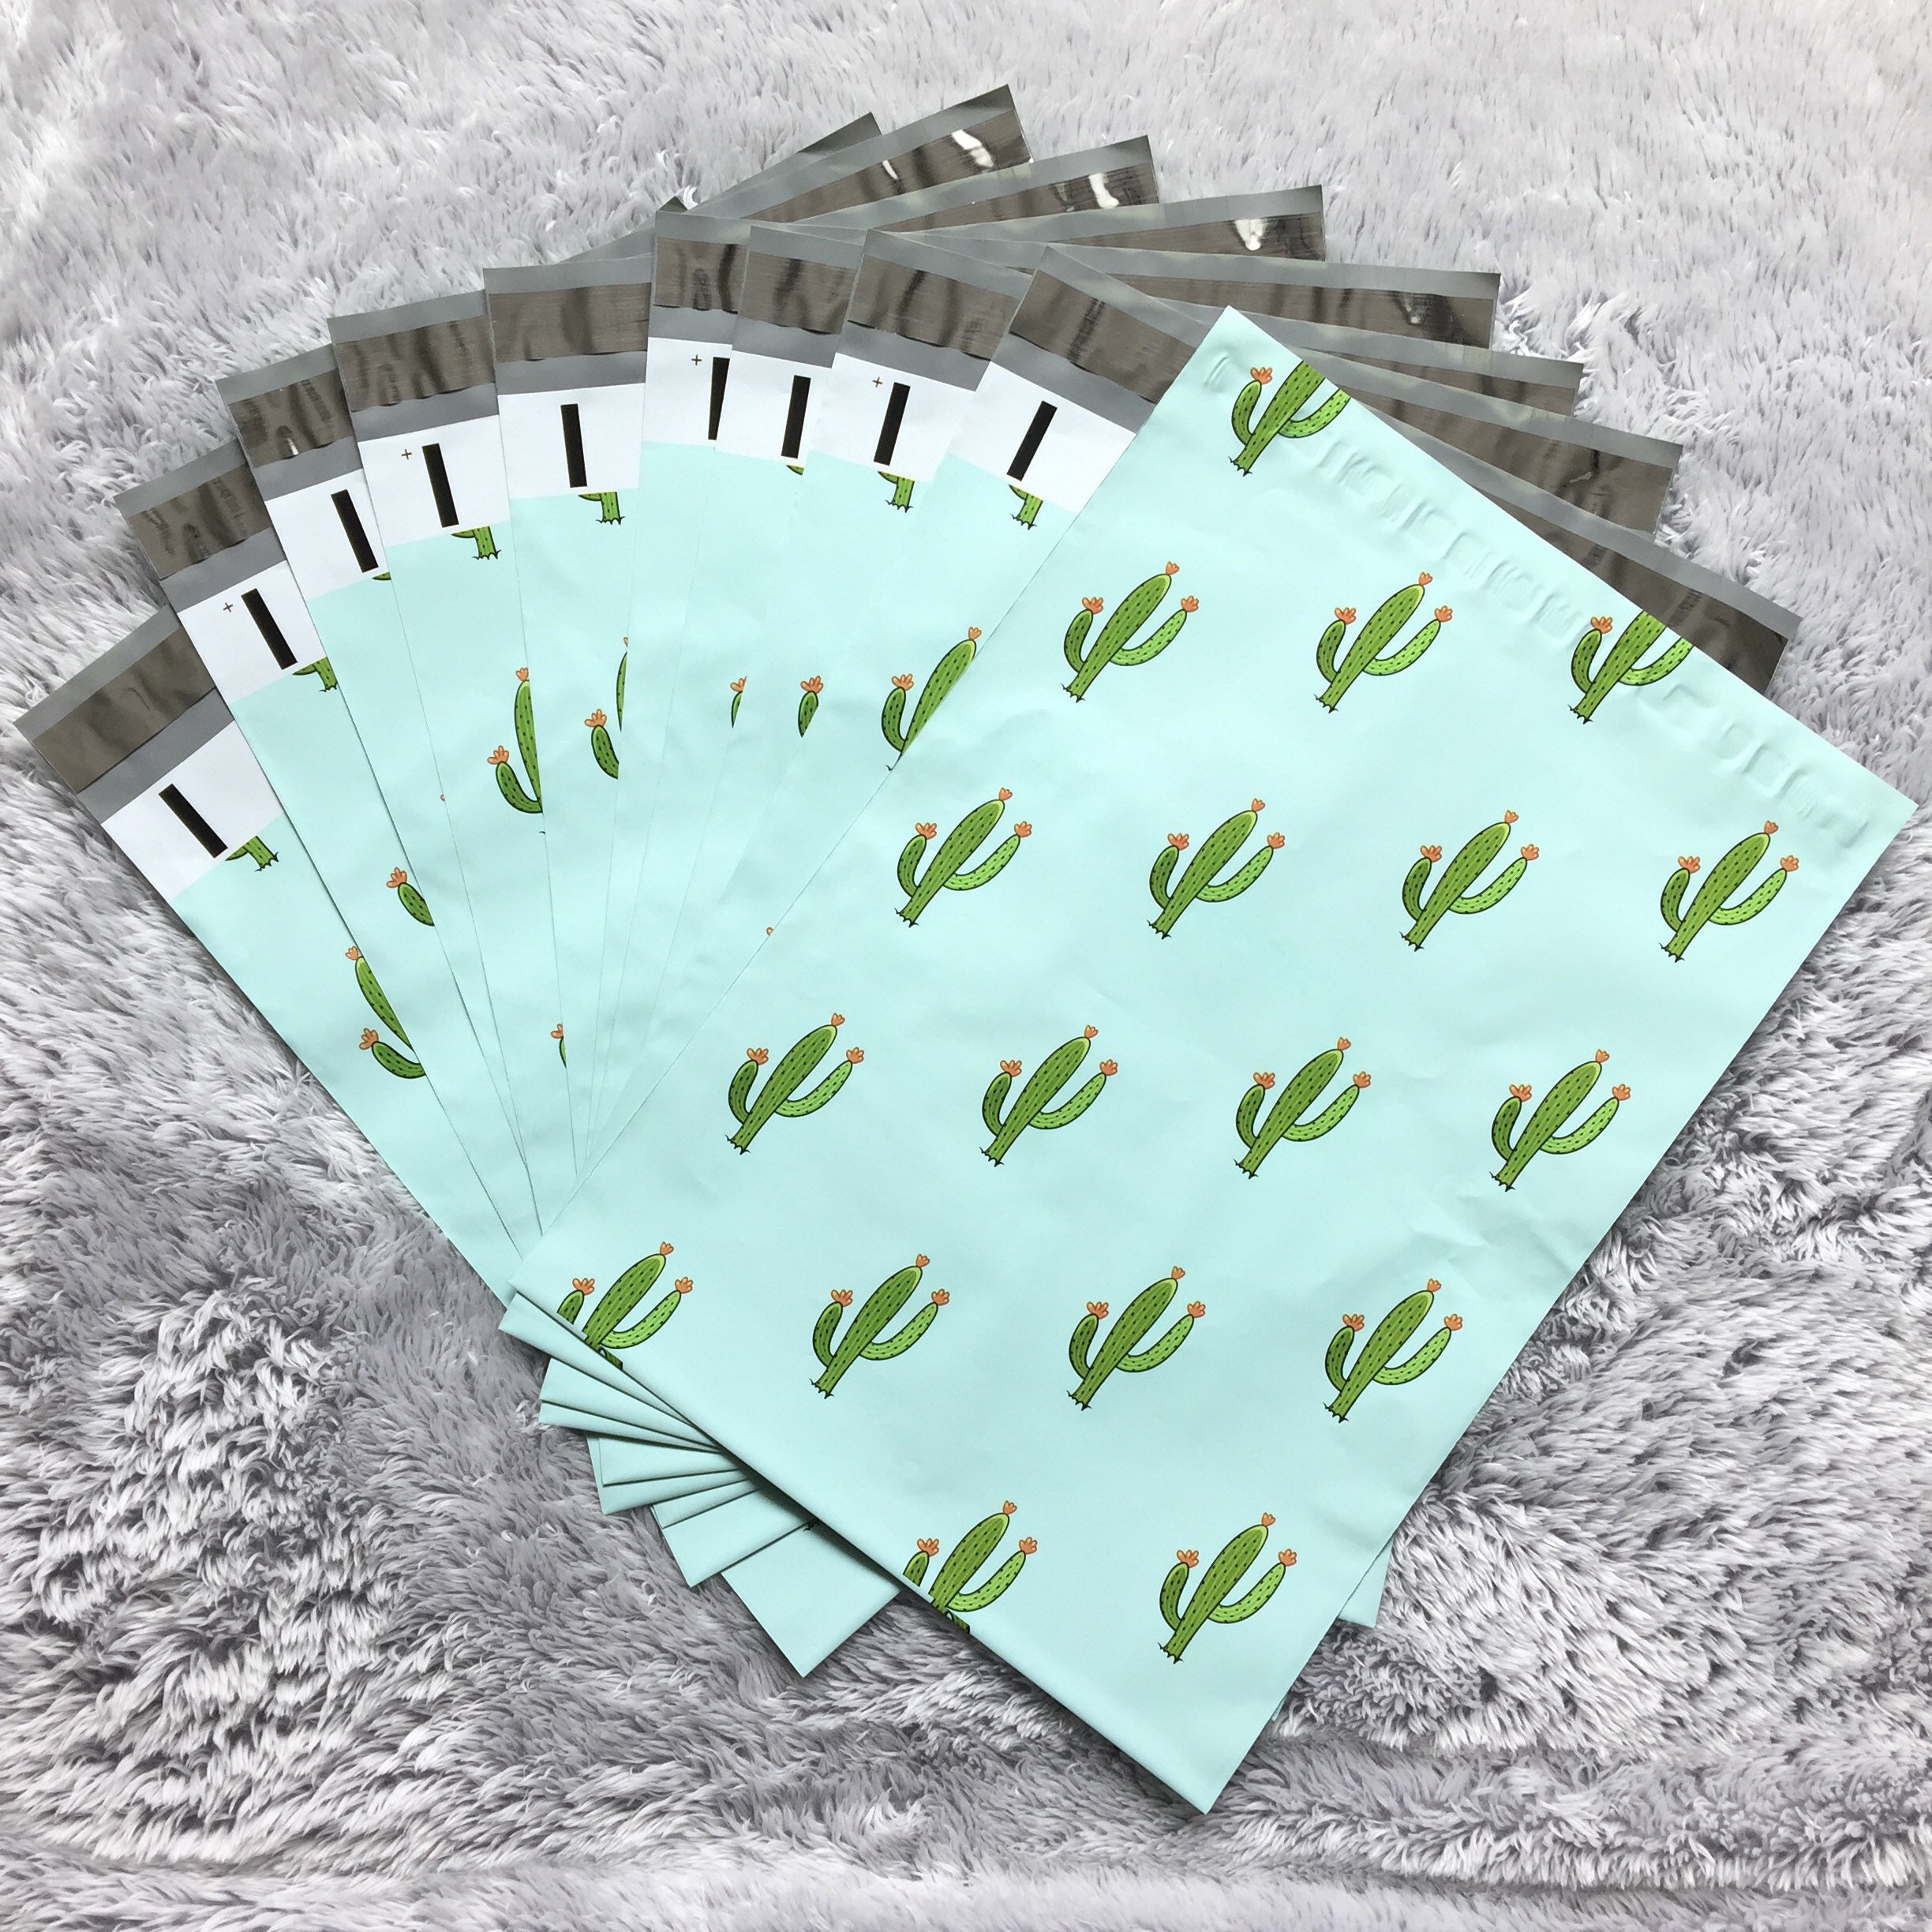 Cactus straw topper – Mail it! mailers and more